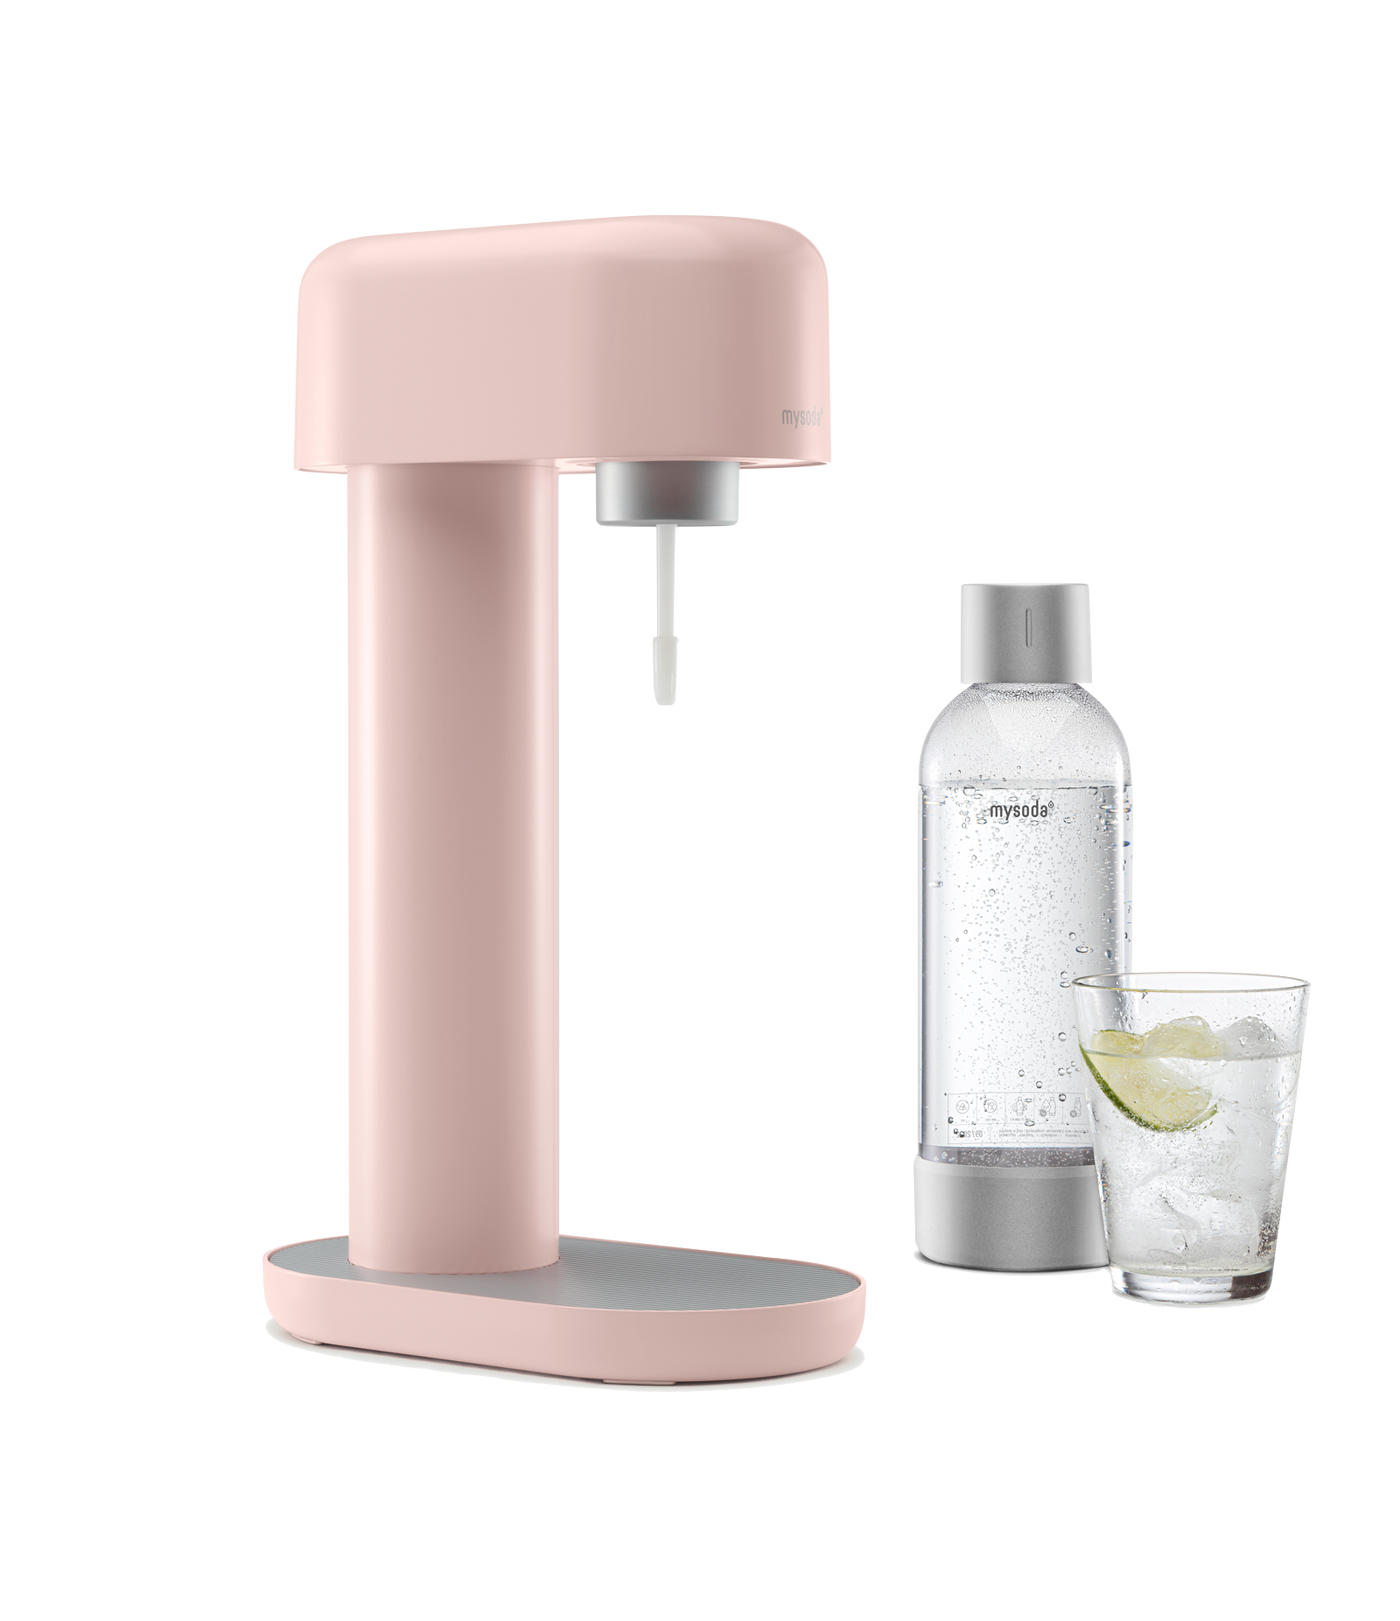 A pink Ruby sparkling water maker with bottle